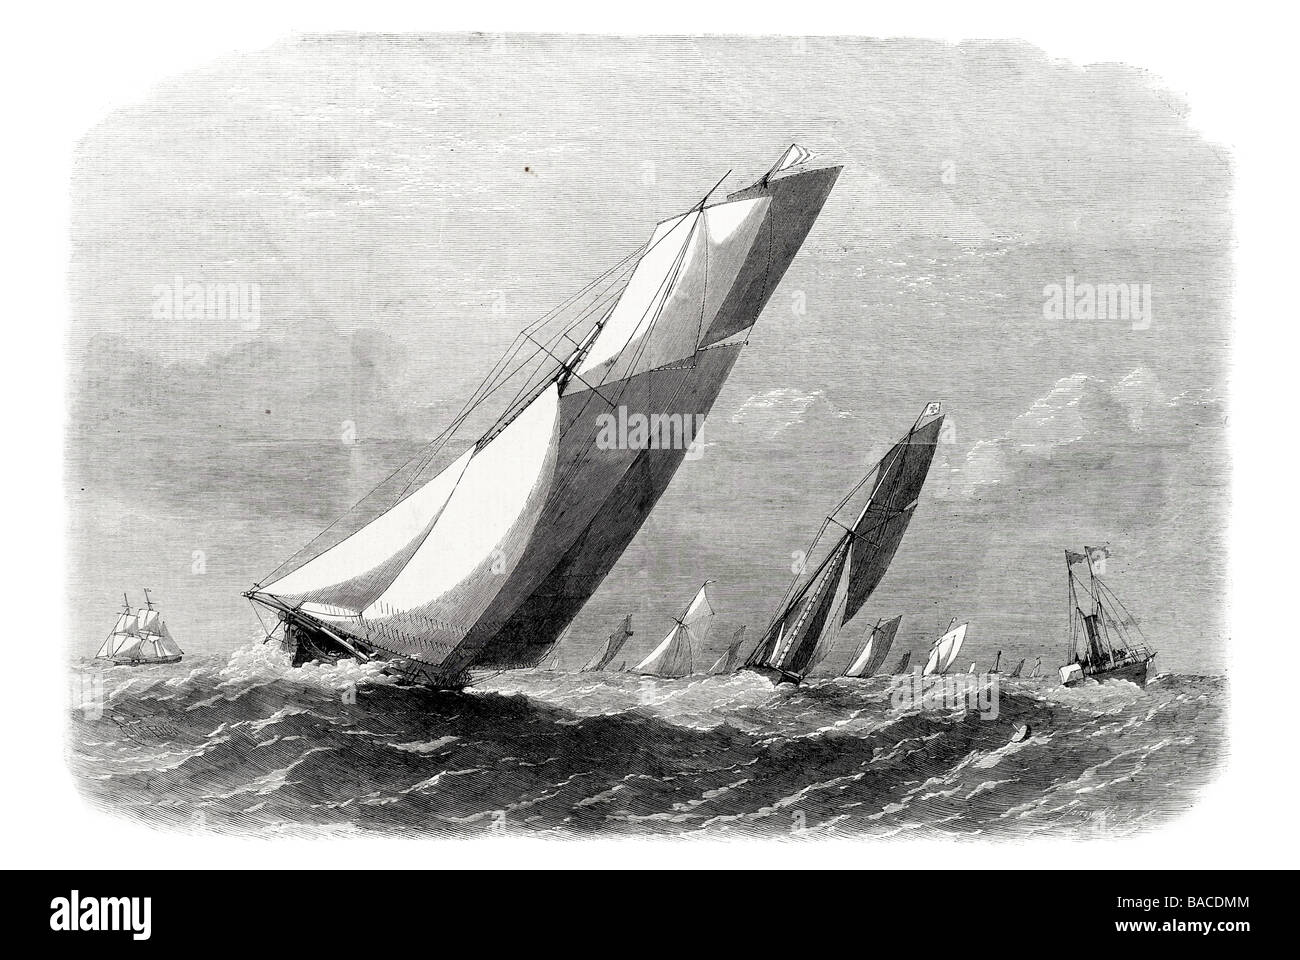 ocean match of the royal yachts between the kentish knock and sunk light ships 1865 sail sailing boat wind ship waves race Stock Photo